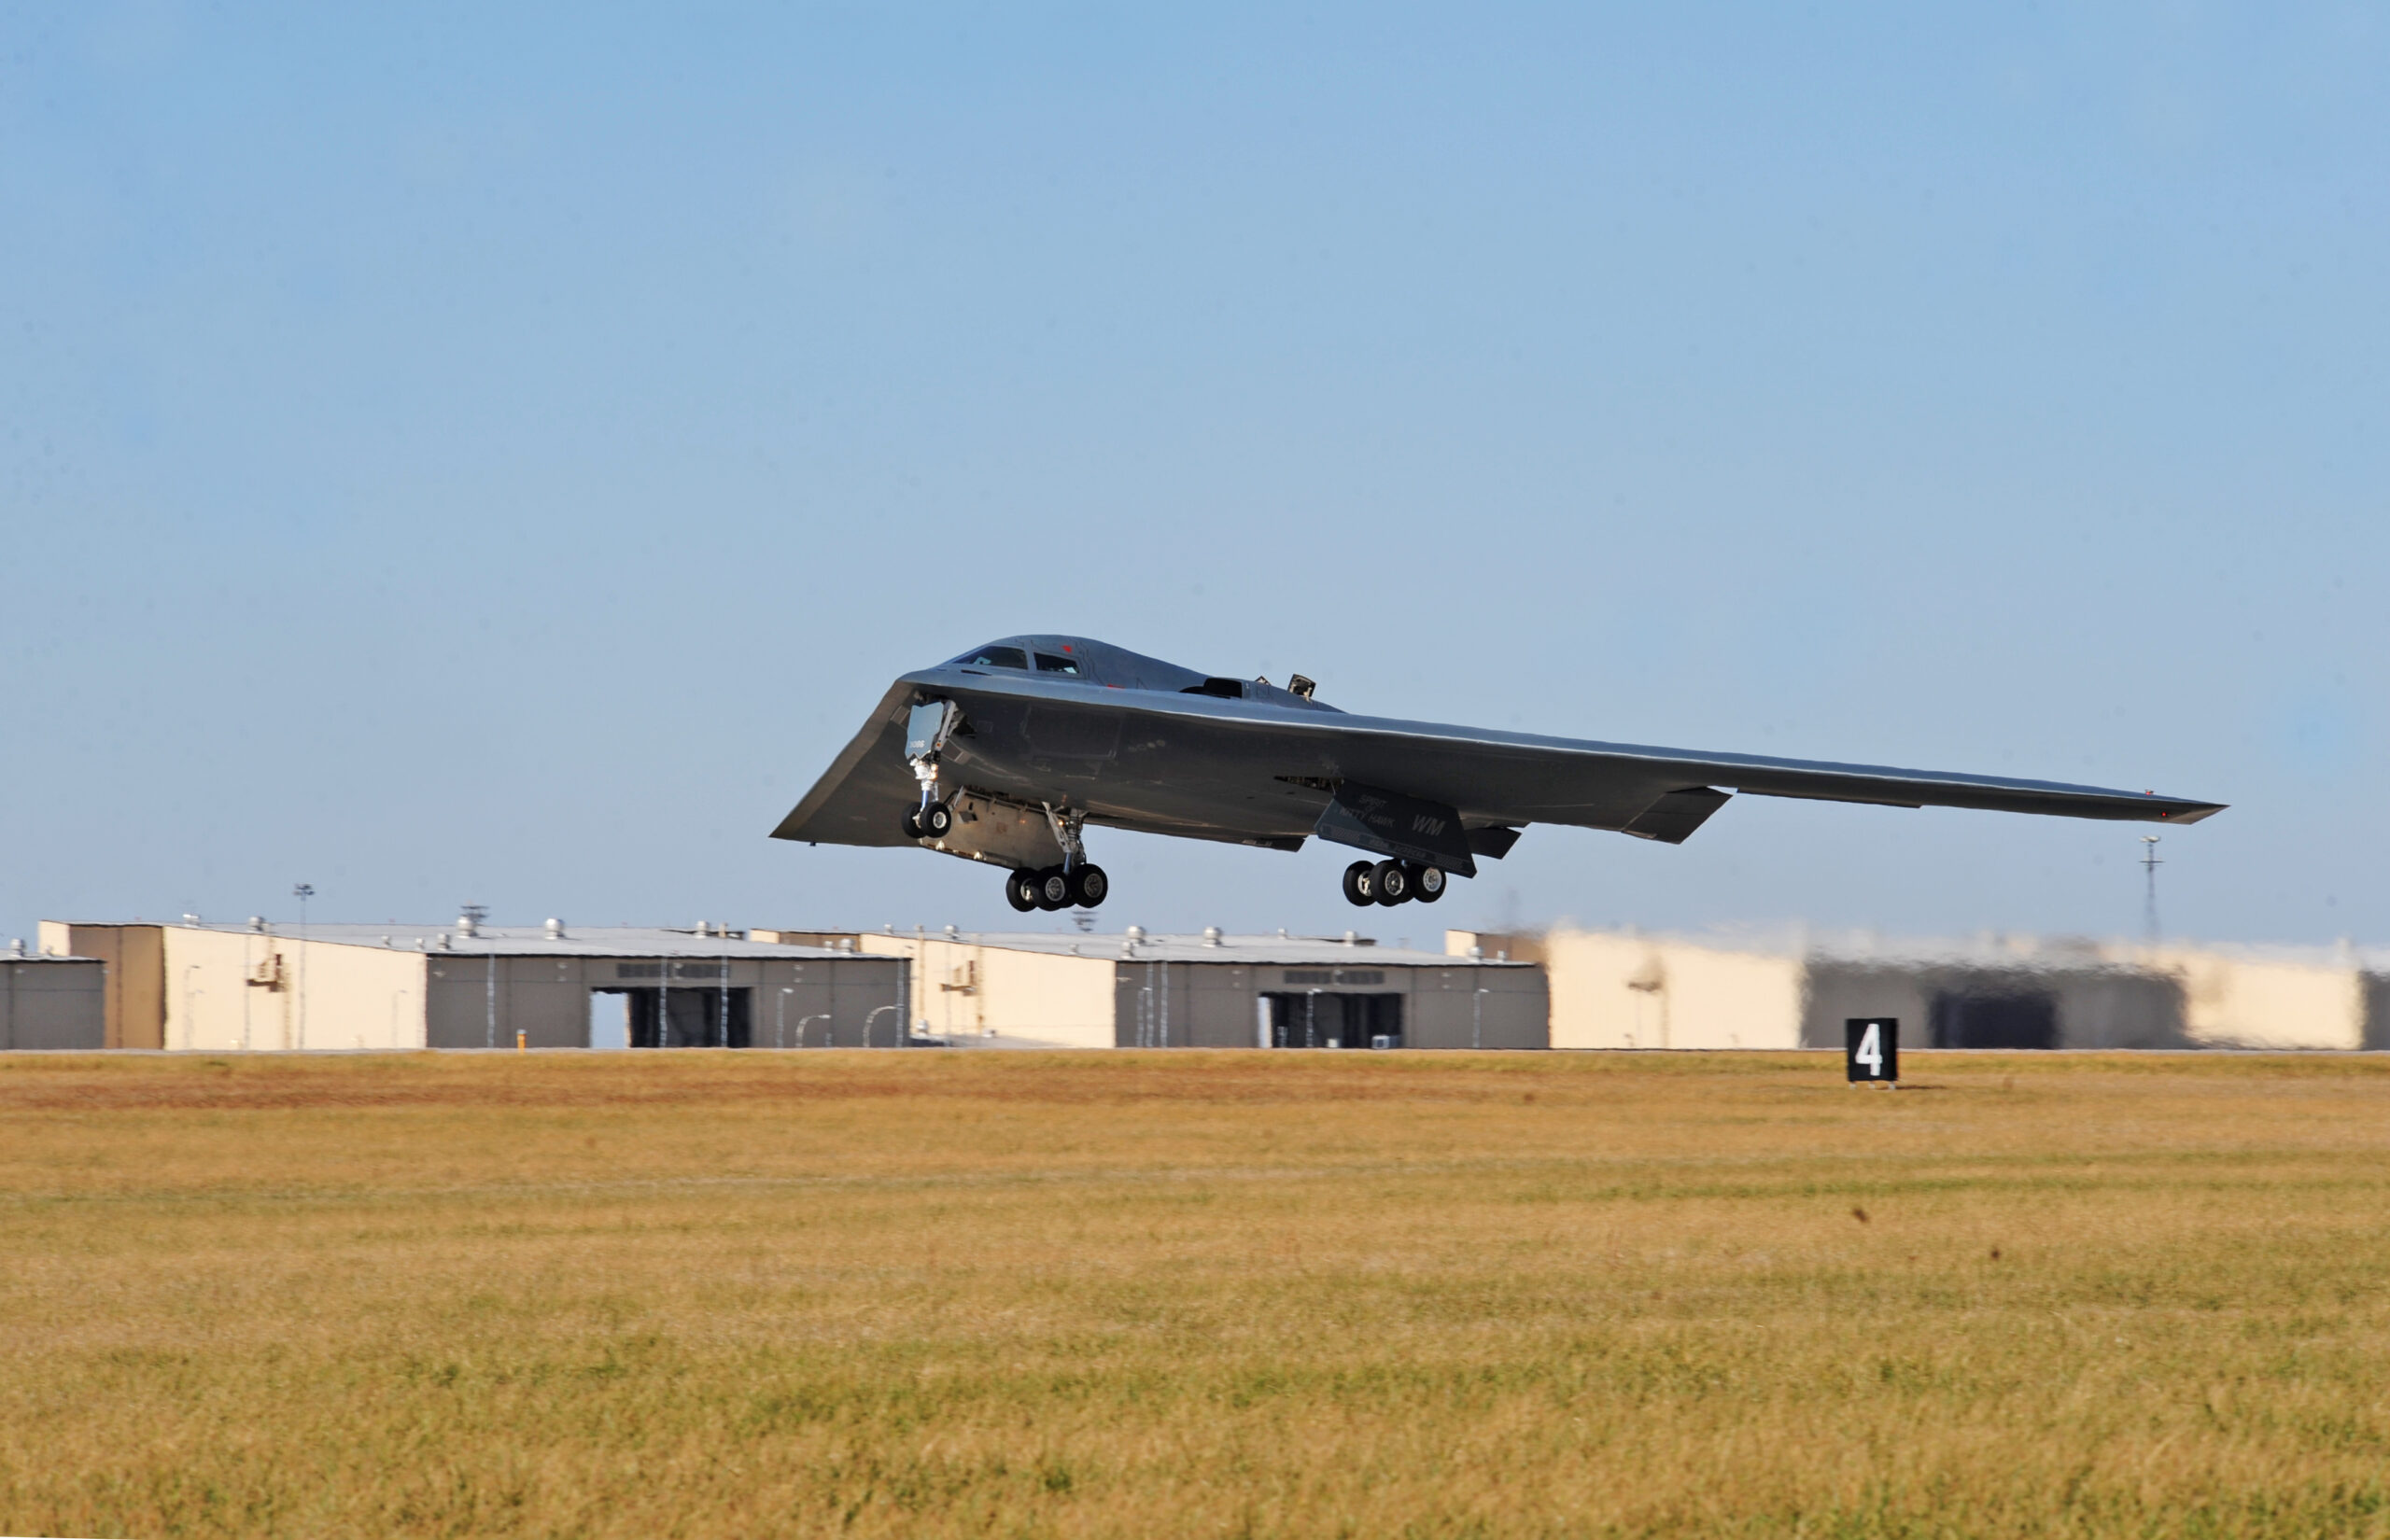 A B-2 Spirit launches from the runway during an exercise at Whiteman Air Force Base, Mo., Nov. 8, 2015. The B-2 Spirit is a multi-role bomber capable of delivering both conventional and nuclear munitions. (U.S. Air Force photo by Tech. Sgt. Miguel Lara III)